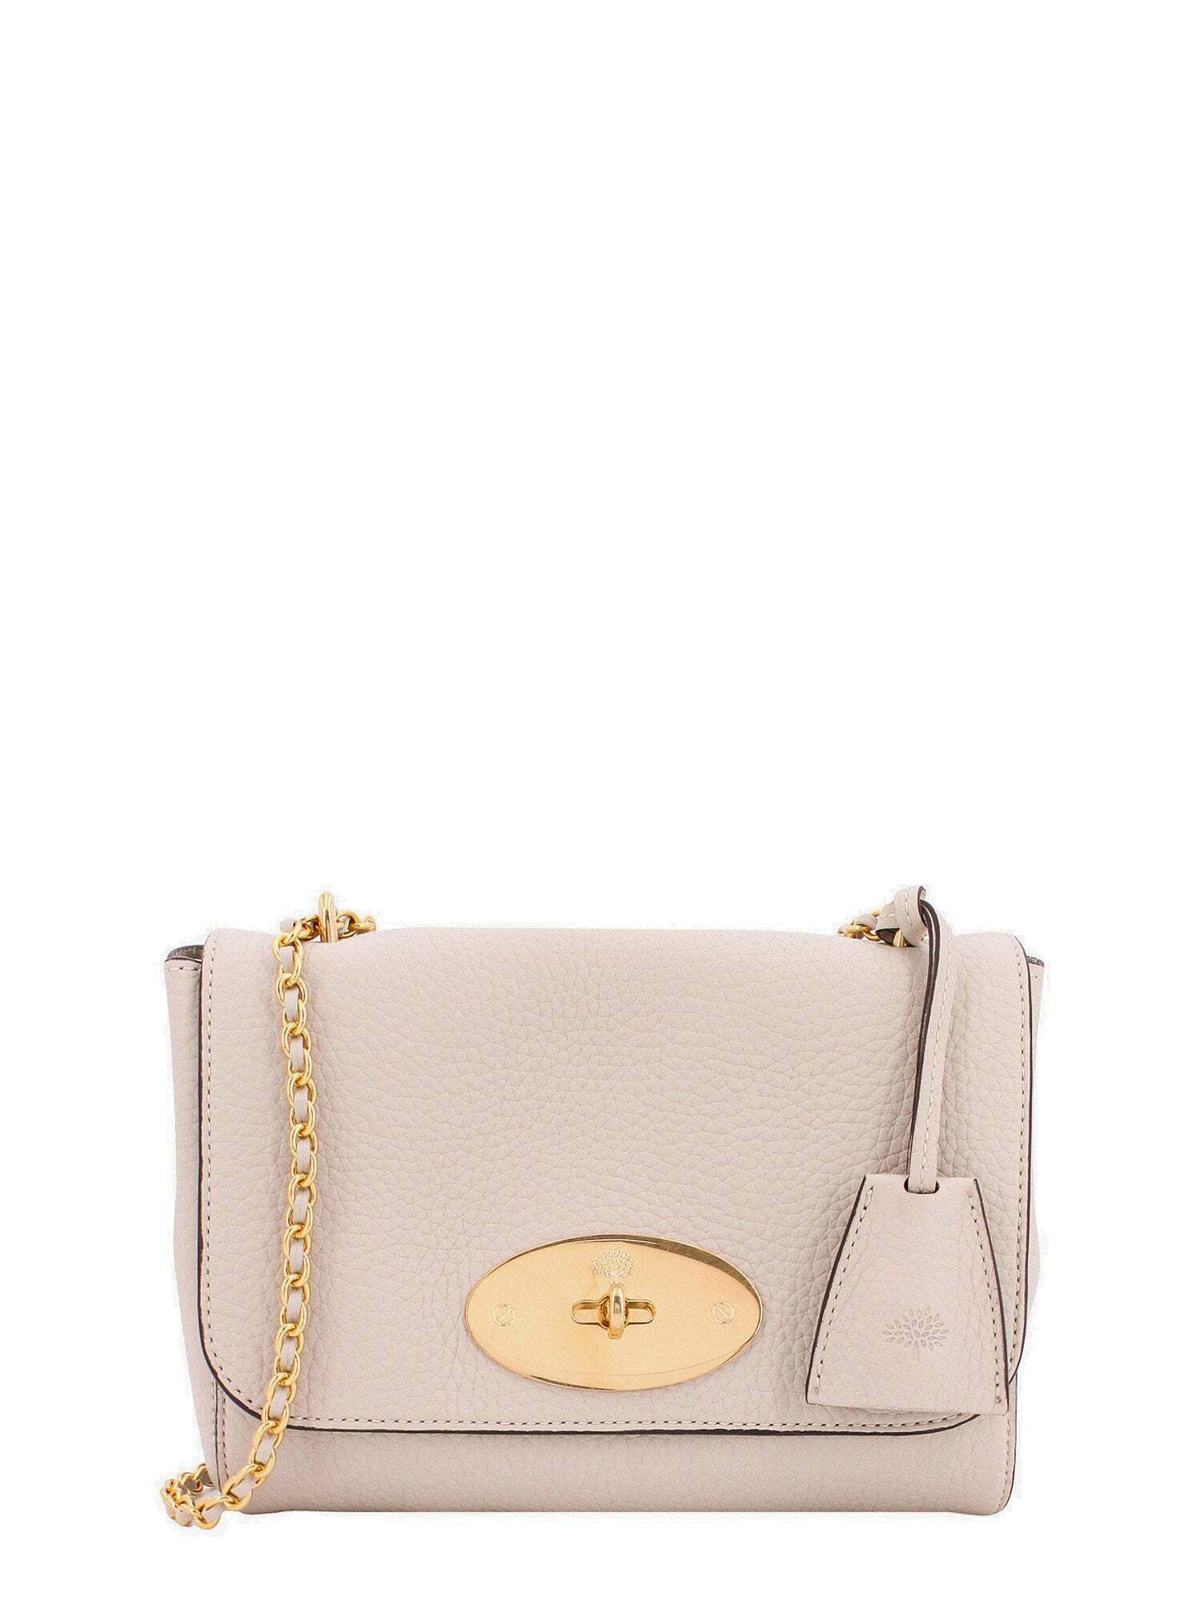 Mulberry Shoulder Bag Beige Womens Mulberry